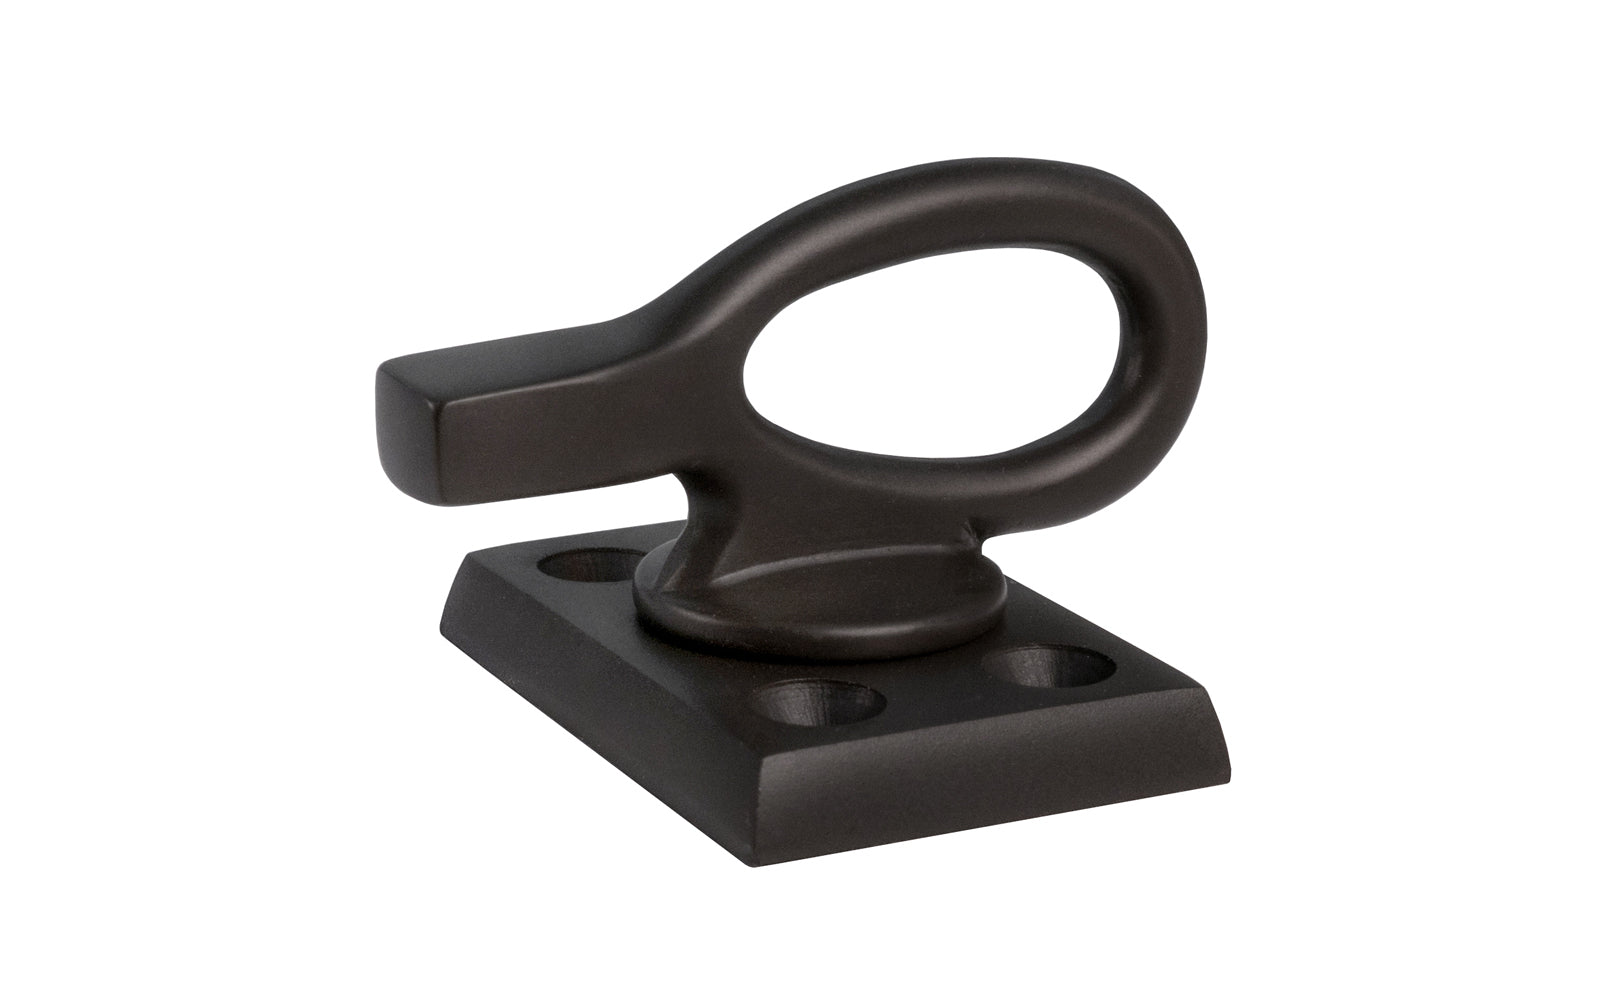 Vintage-style Hardware · Classic & traditional ring handle window casement latch made of quality solid brass. Latches & locks casement window frames. Durable strong pivot turn for sturdy operation. Oil Rubbed Bronze Finish.